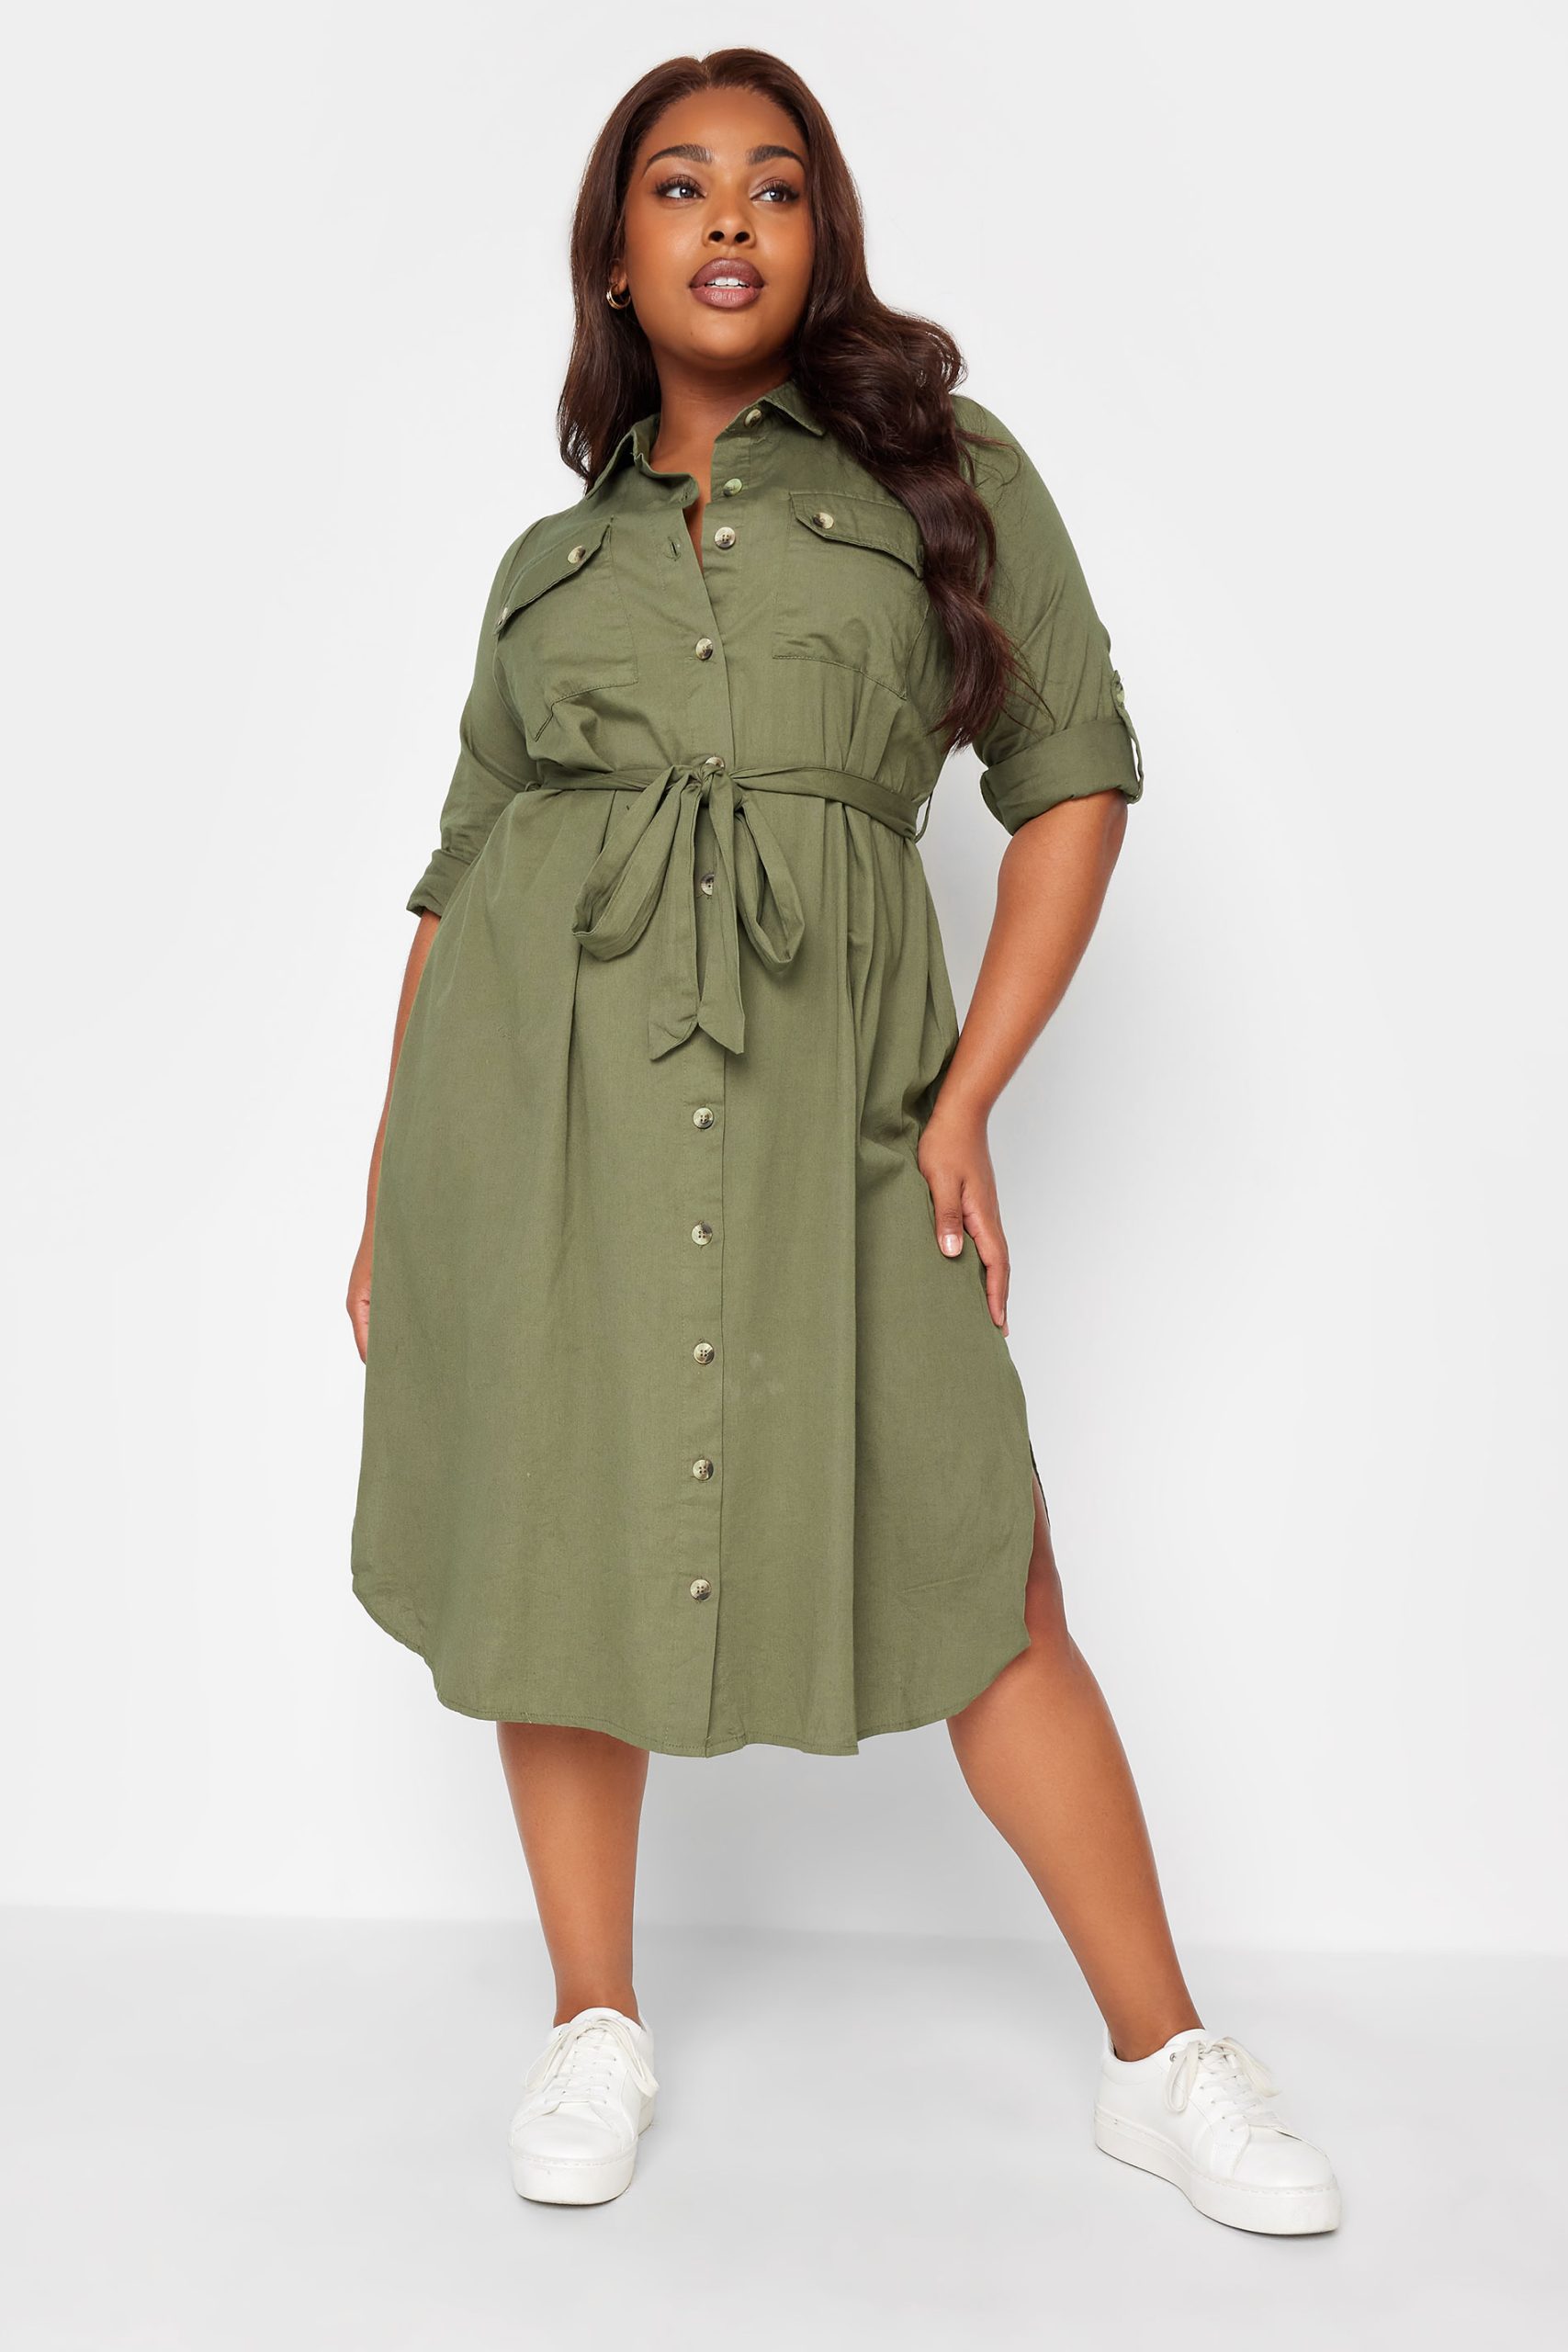 LIMITED COLLECTION Curve Khaki Green Utility Shirt Dress from Yoursclothing